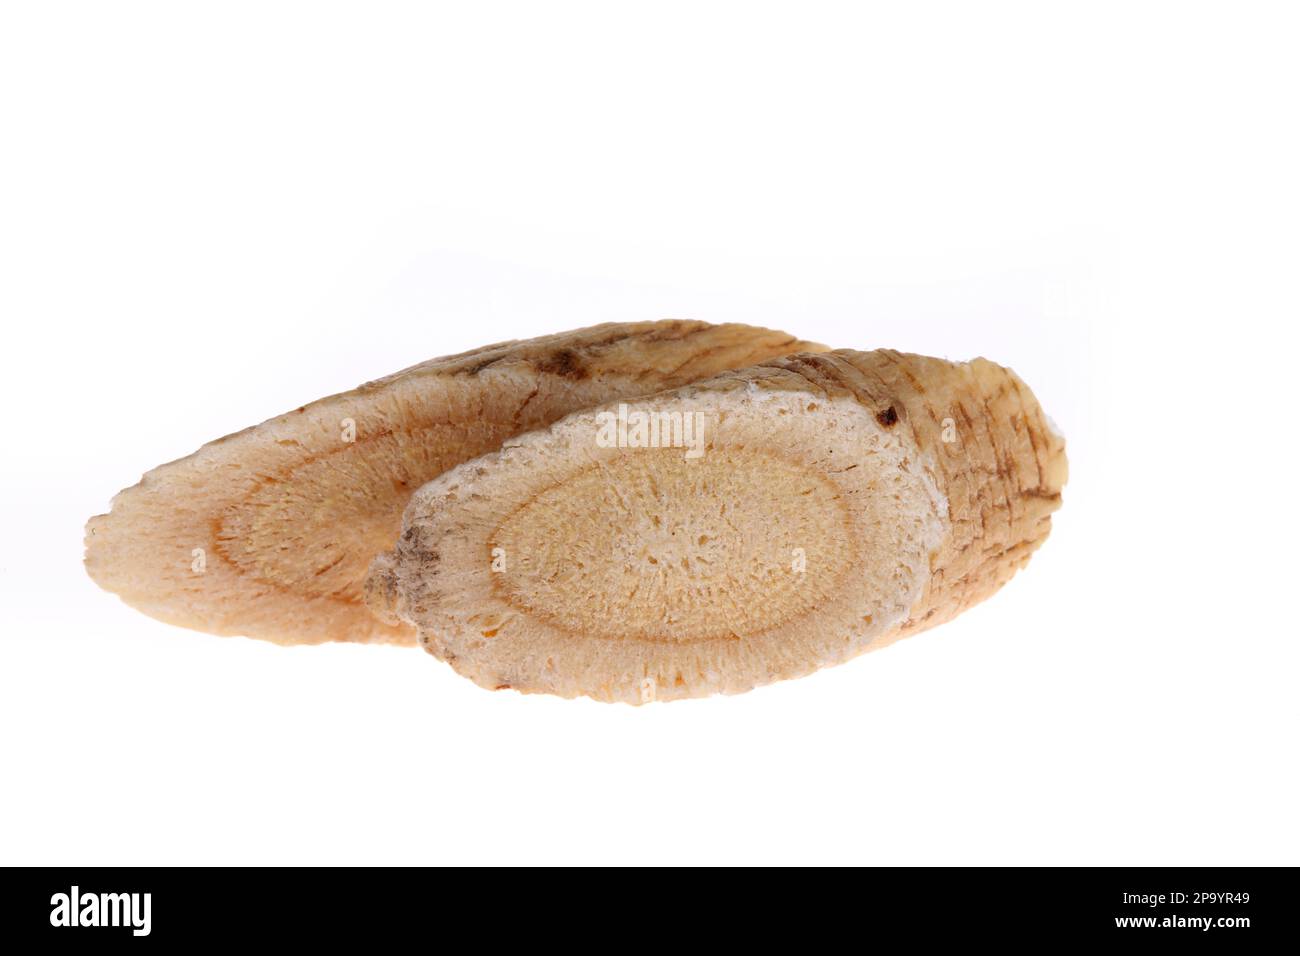 Chinese herbal medicine astragalus membranaceus on a white background, close-up pictures Stock Photo